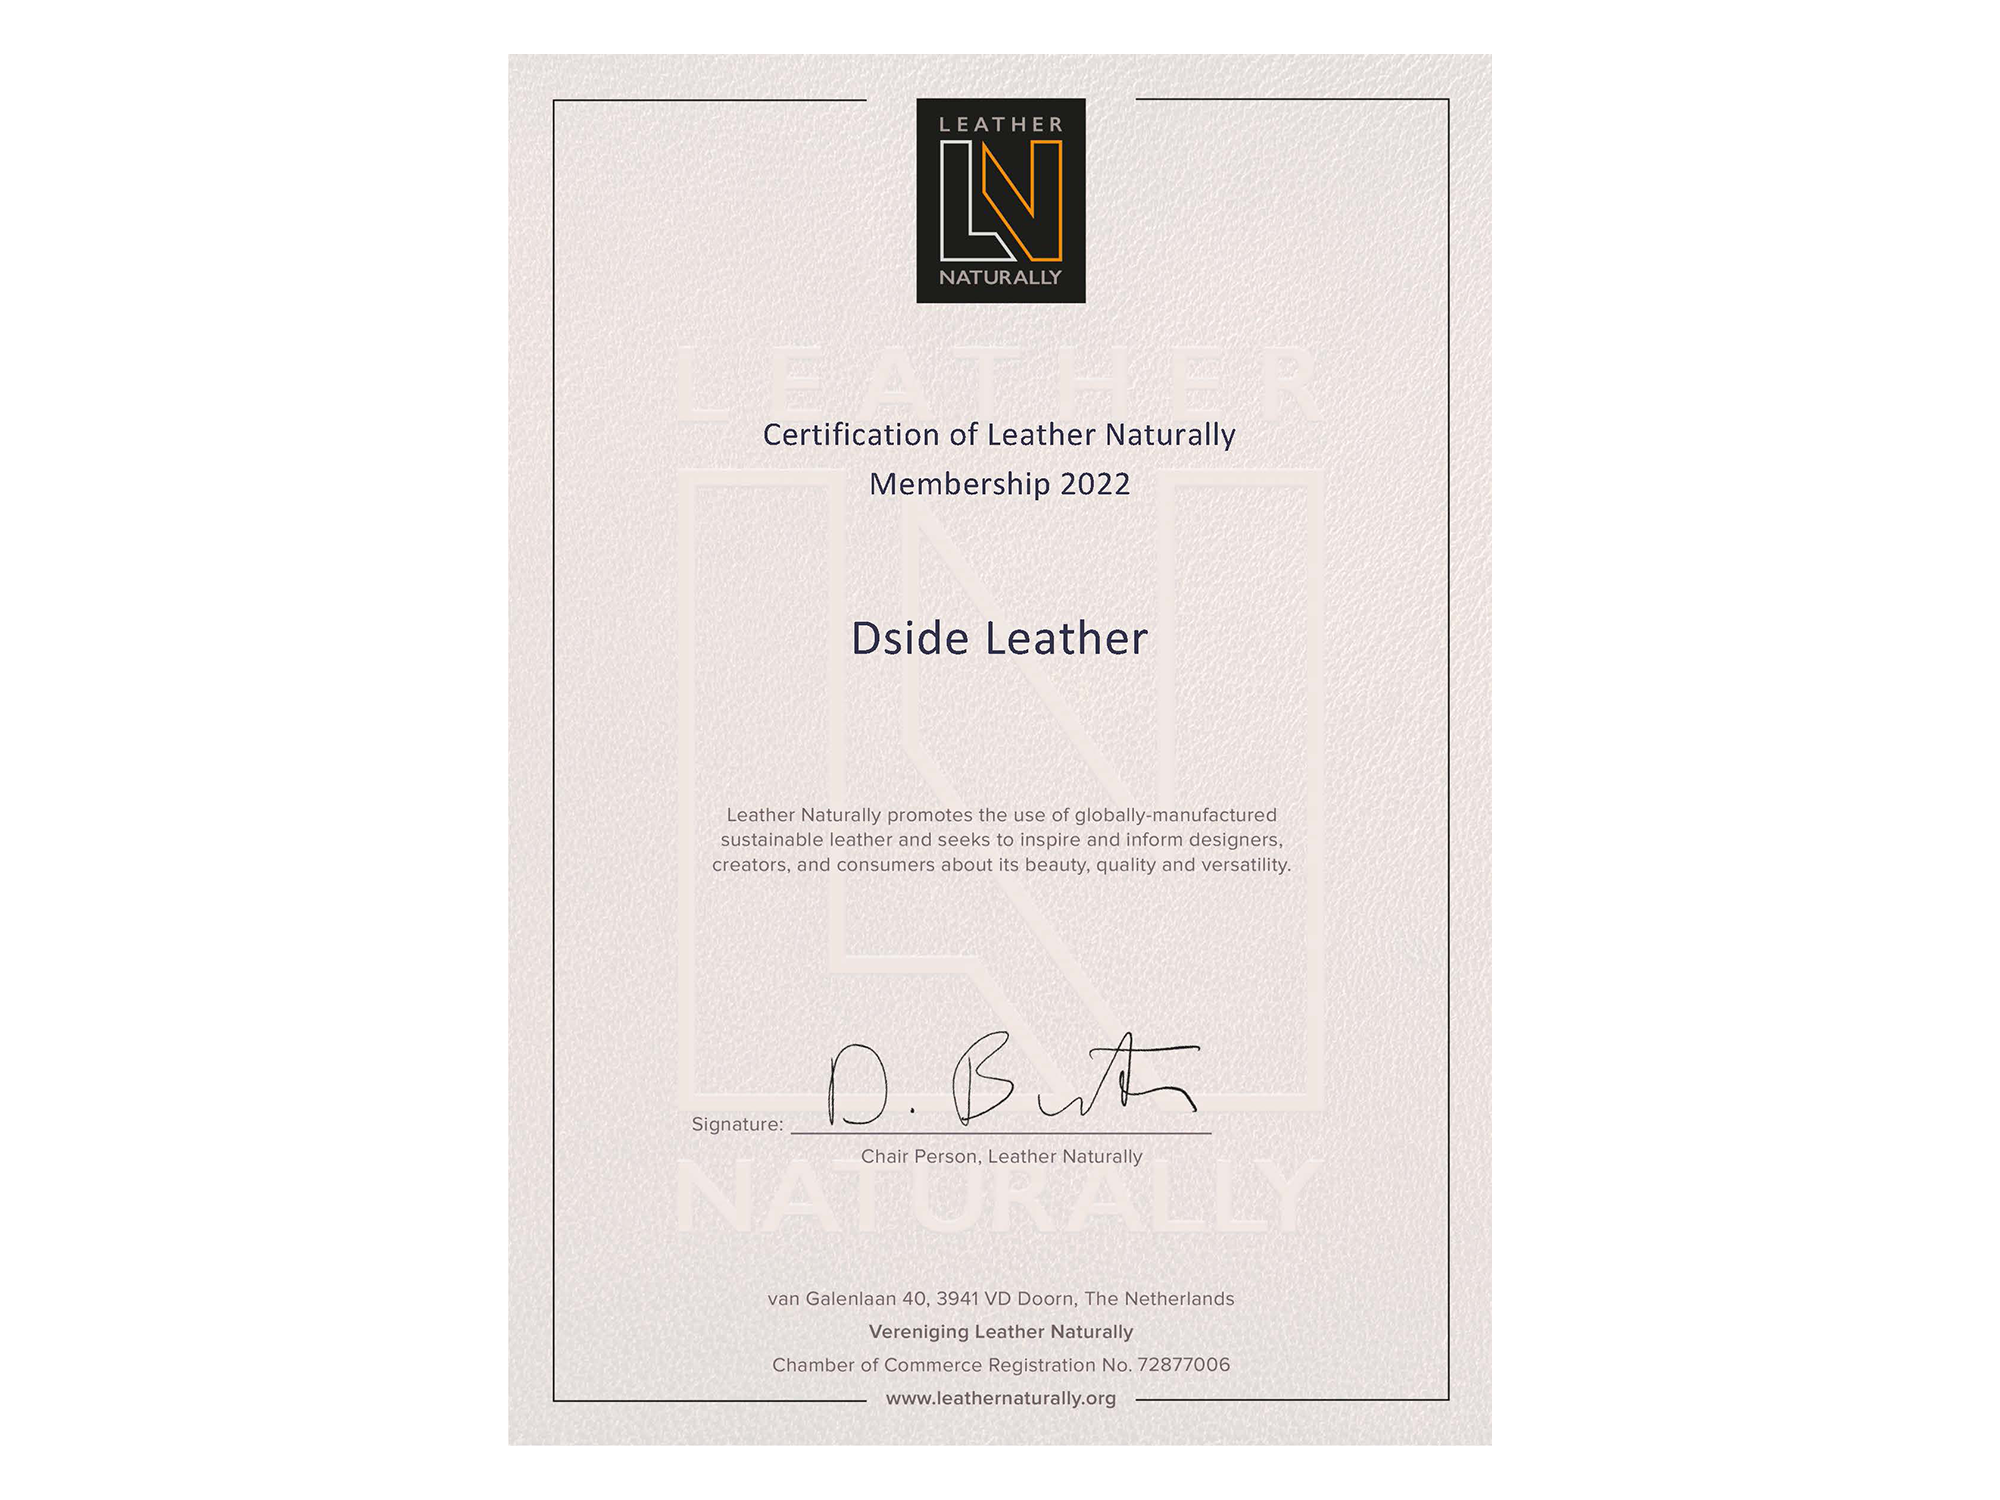 Certification of Leather Naturally Membership 2022 